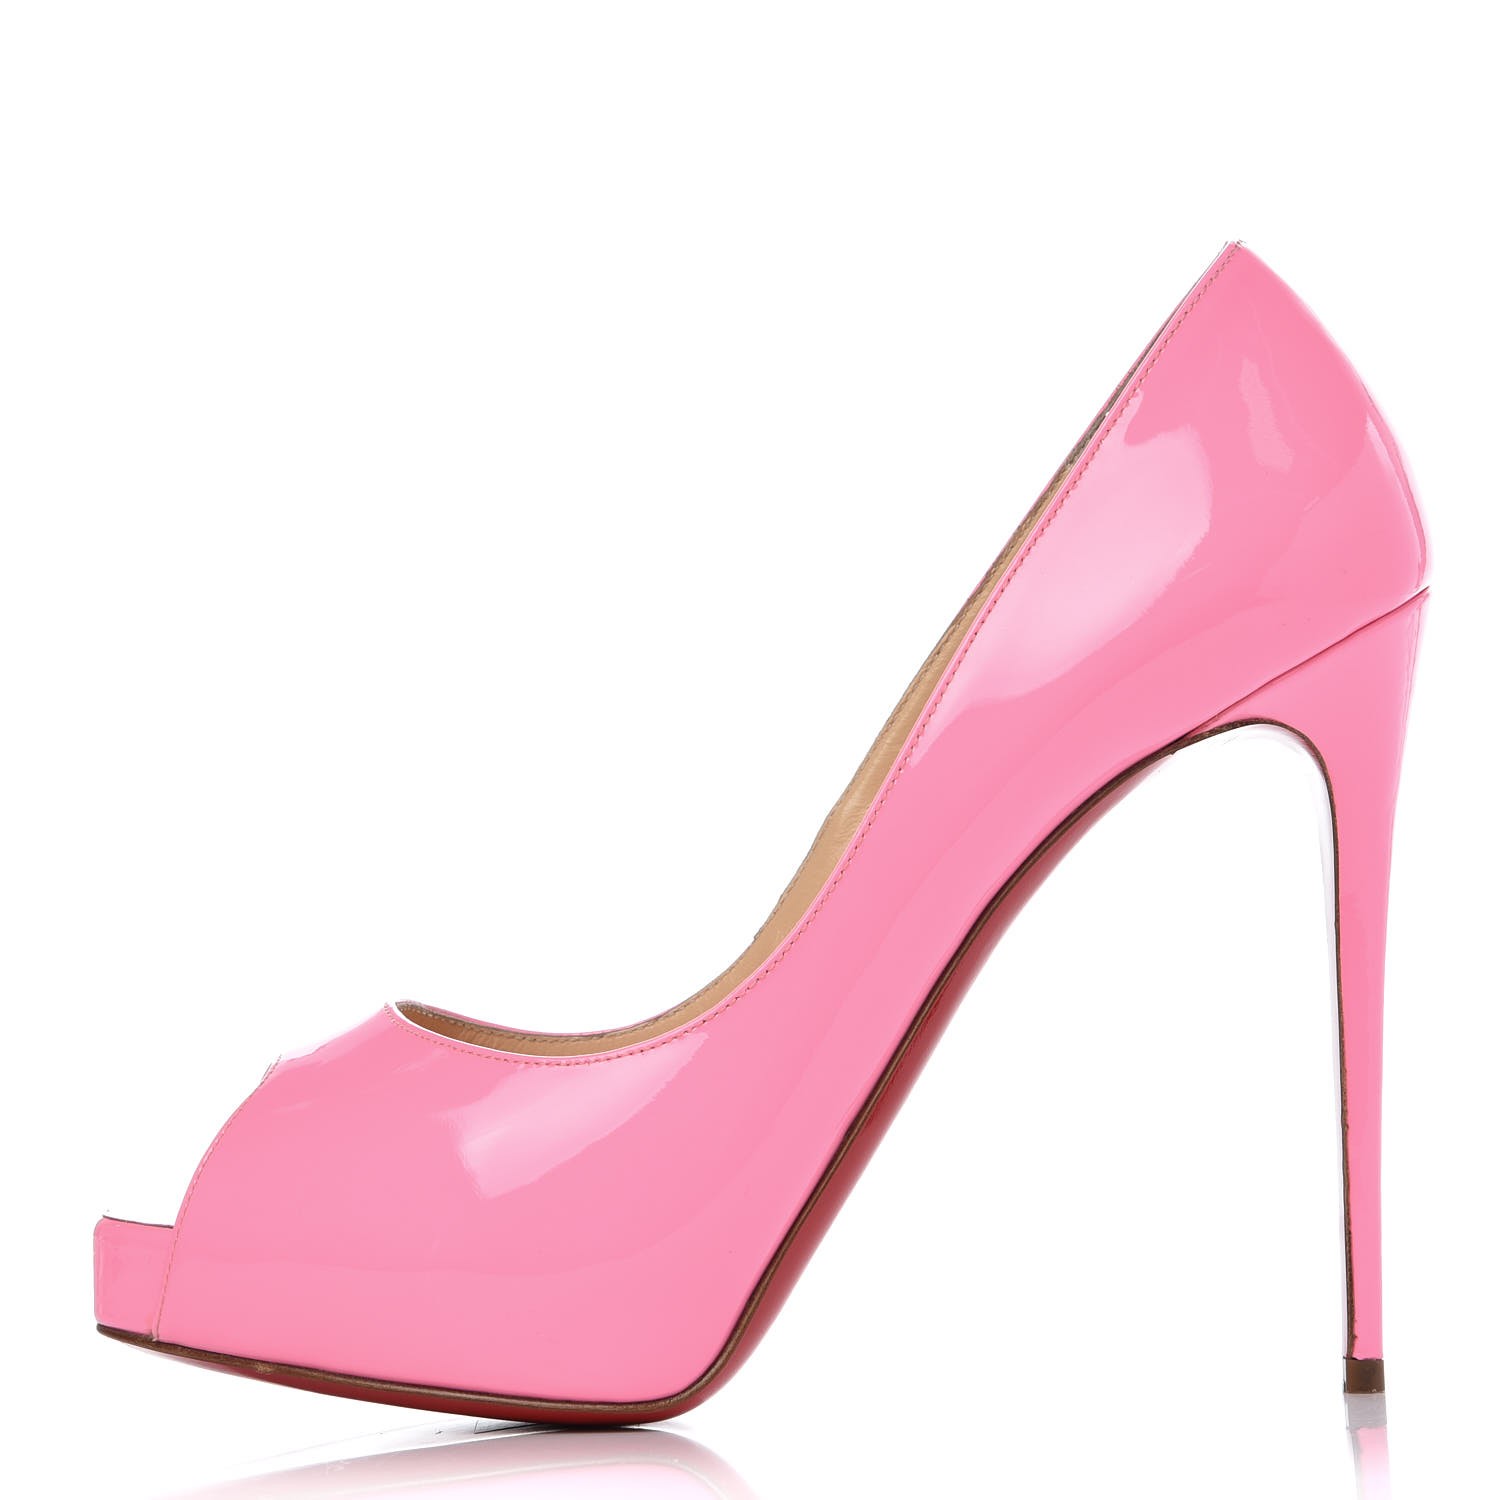 CHRISTIAN LOUBOUTIN Patent New Very Prive 120 Pumps 38.5 Pink 